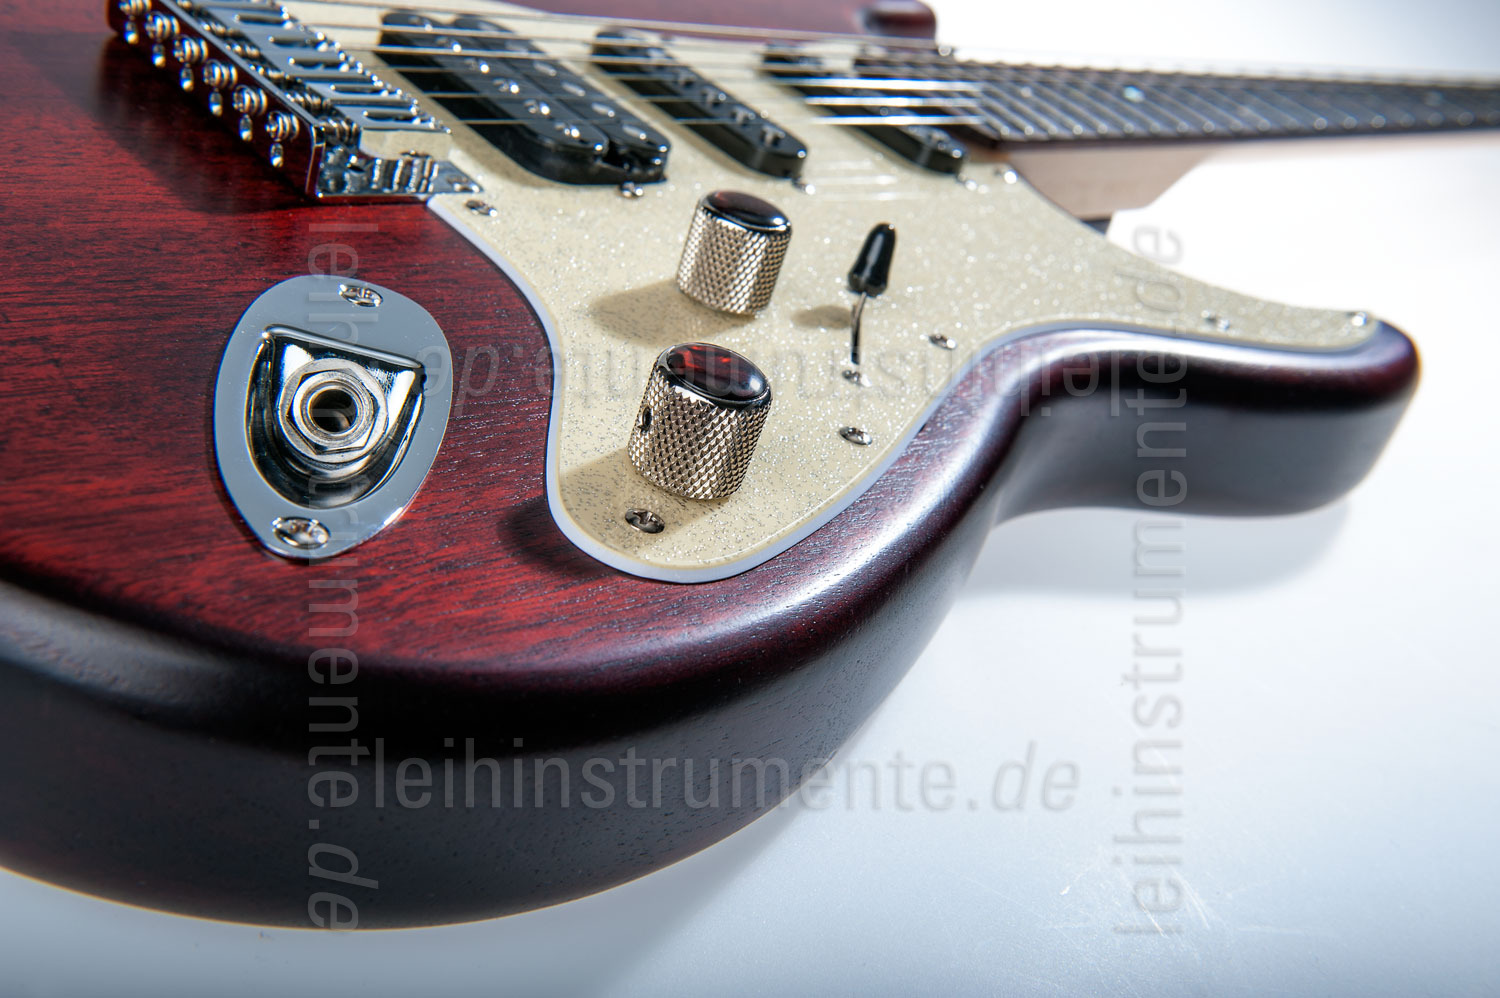 to article description / price Electric Guitar BERSTECHER Old Whisky (Goldsmith edition) + hard case - made in Germany